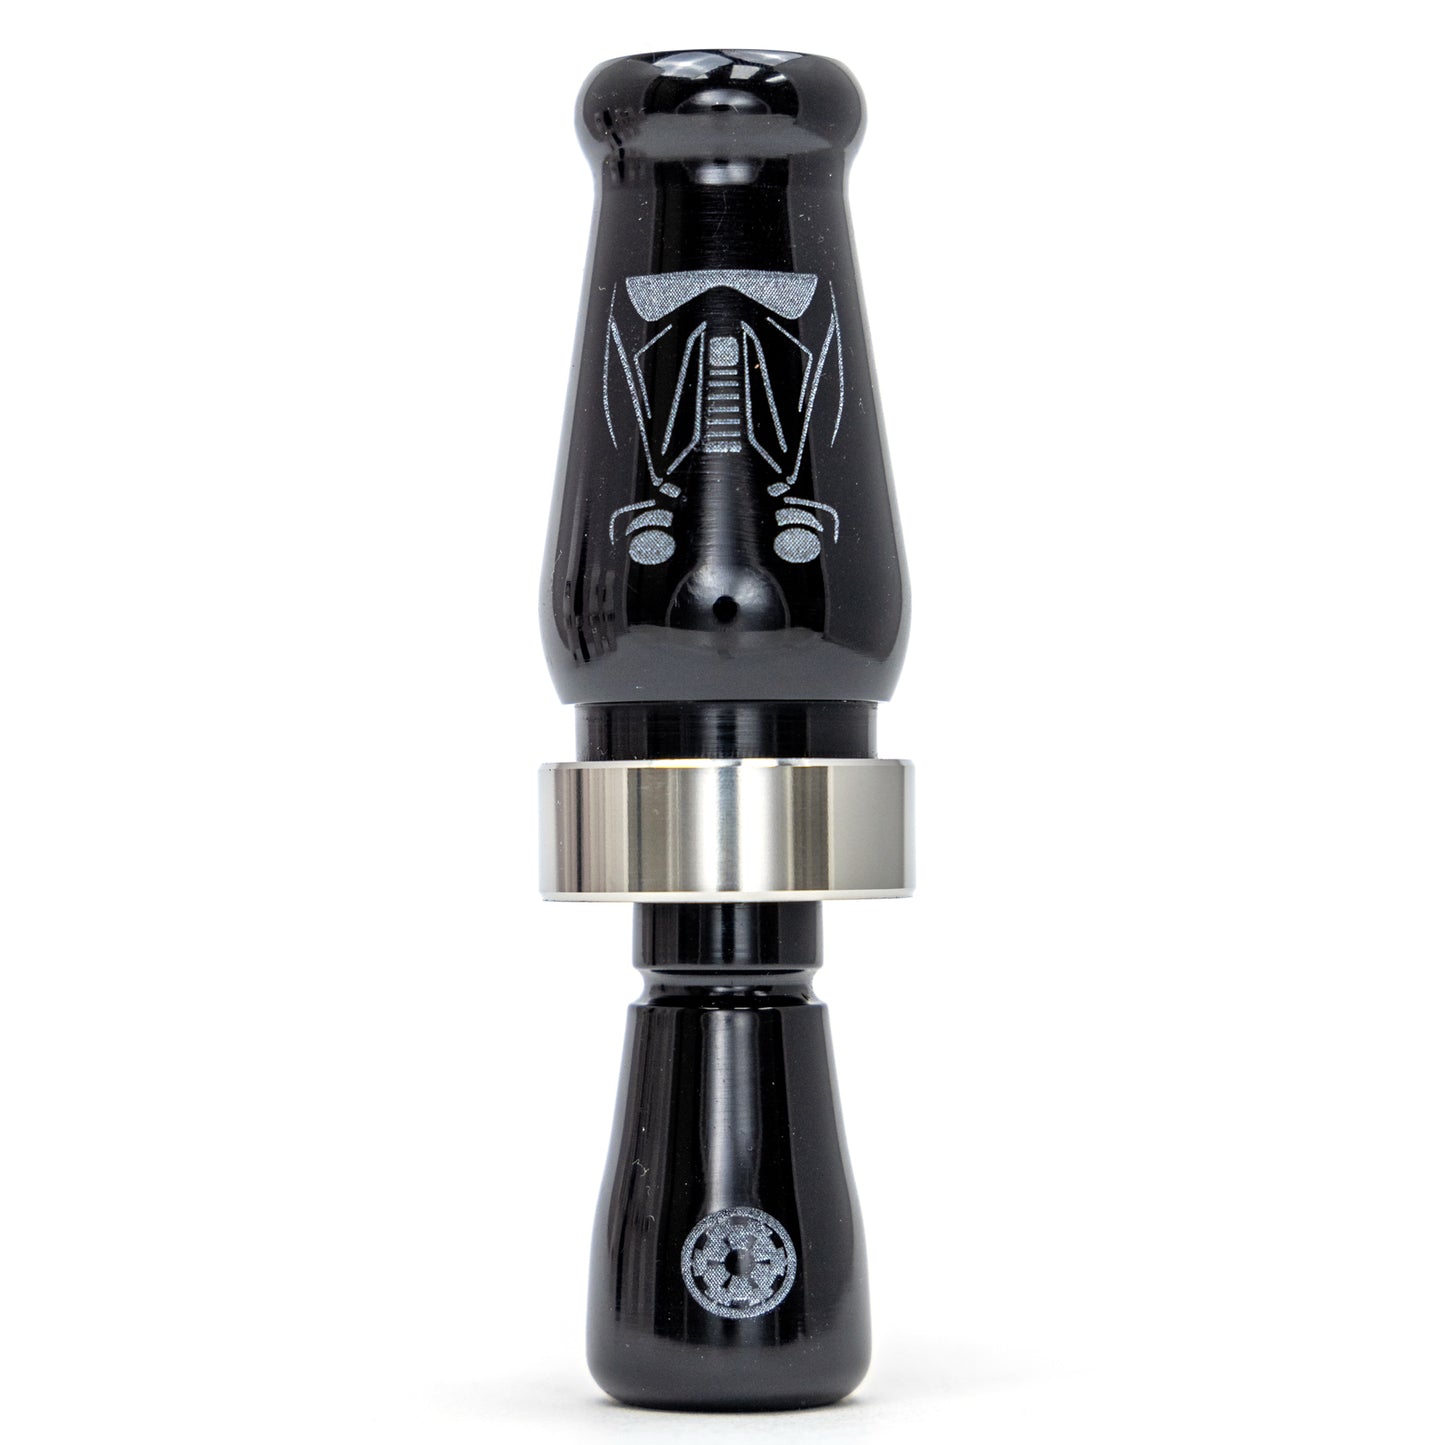 Daisy Cutter Galactic Troopers - Limited Run